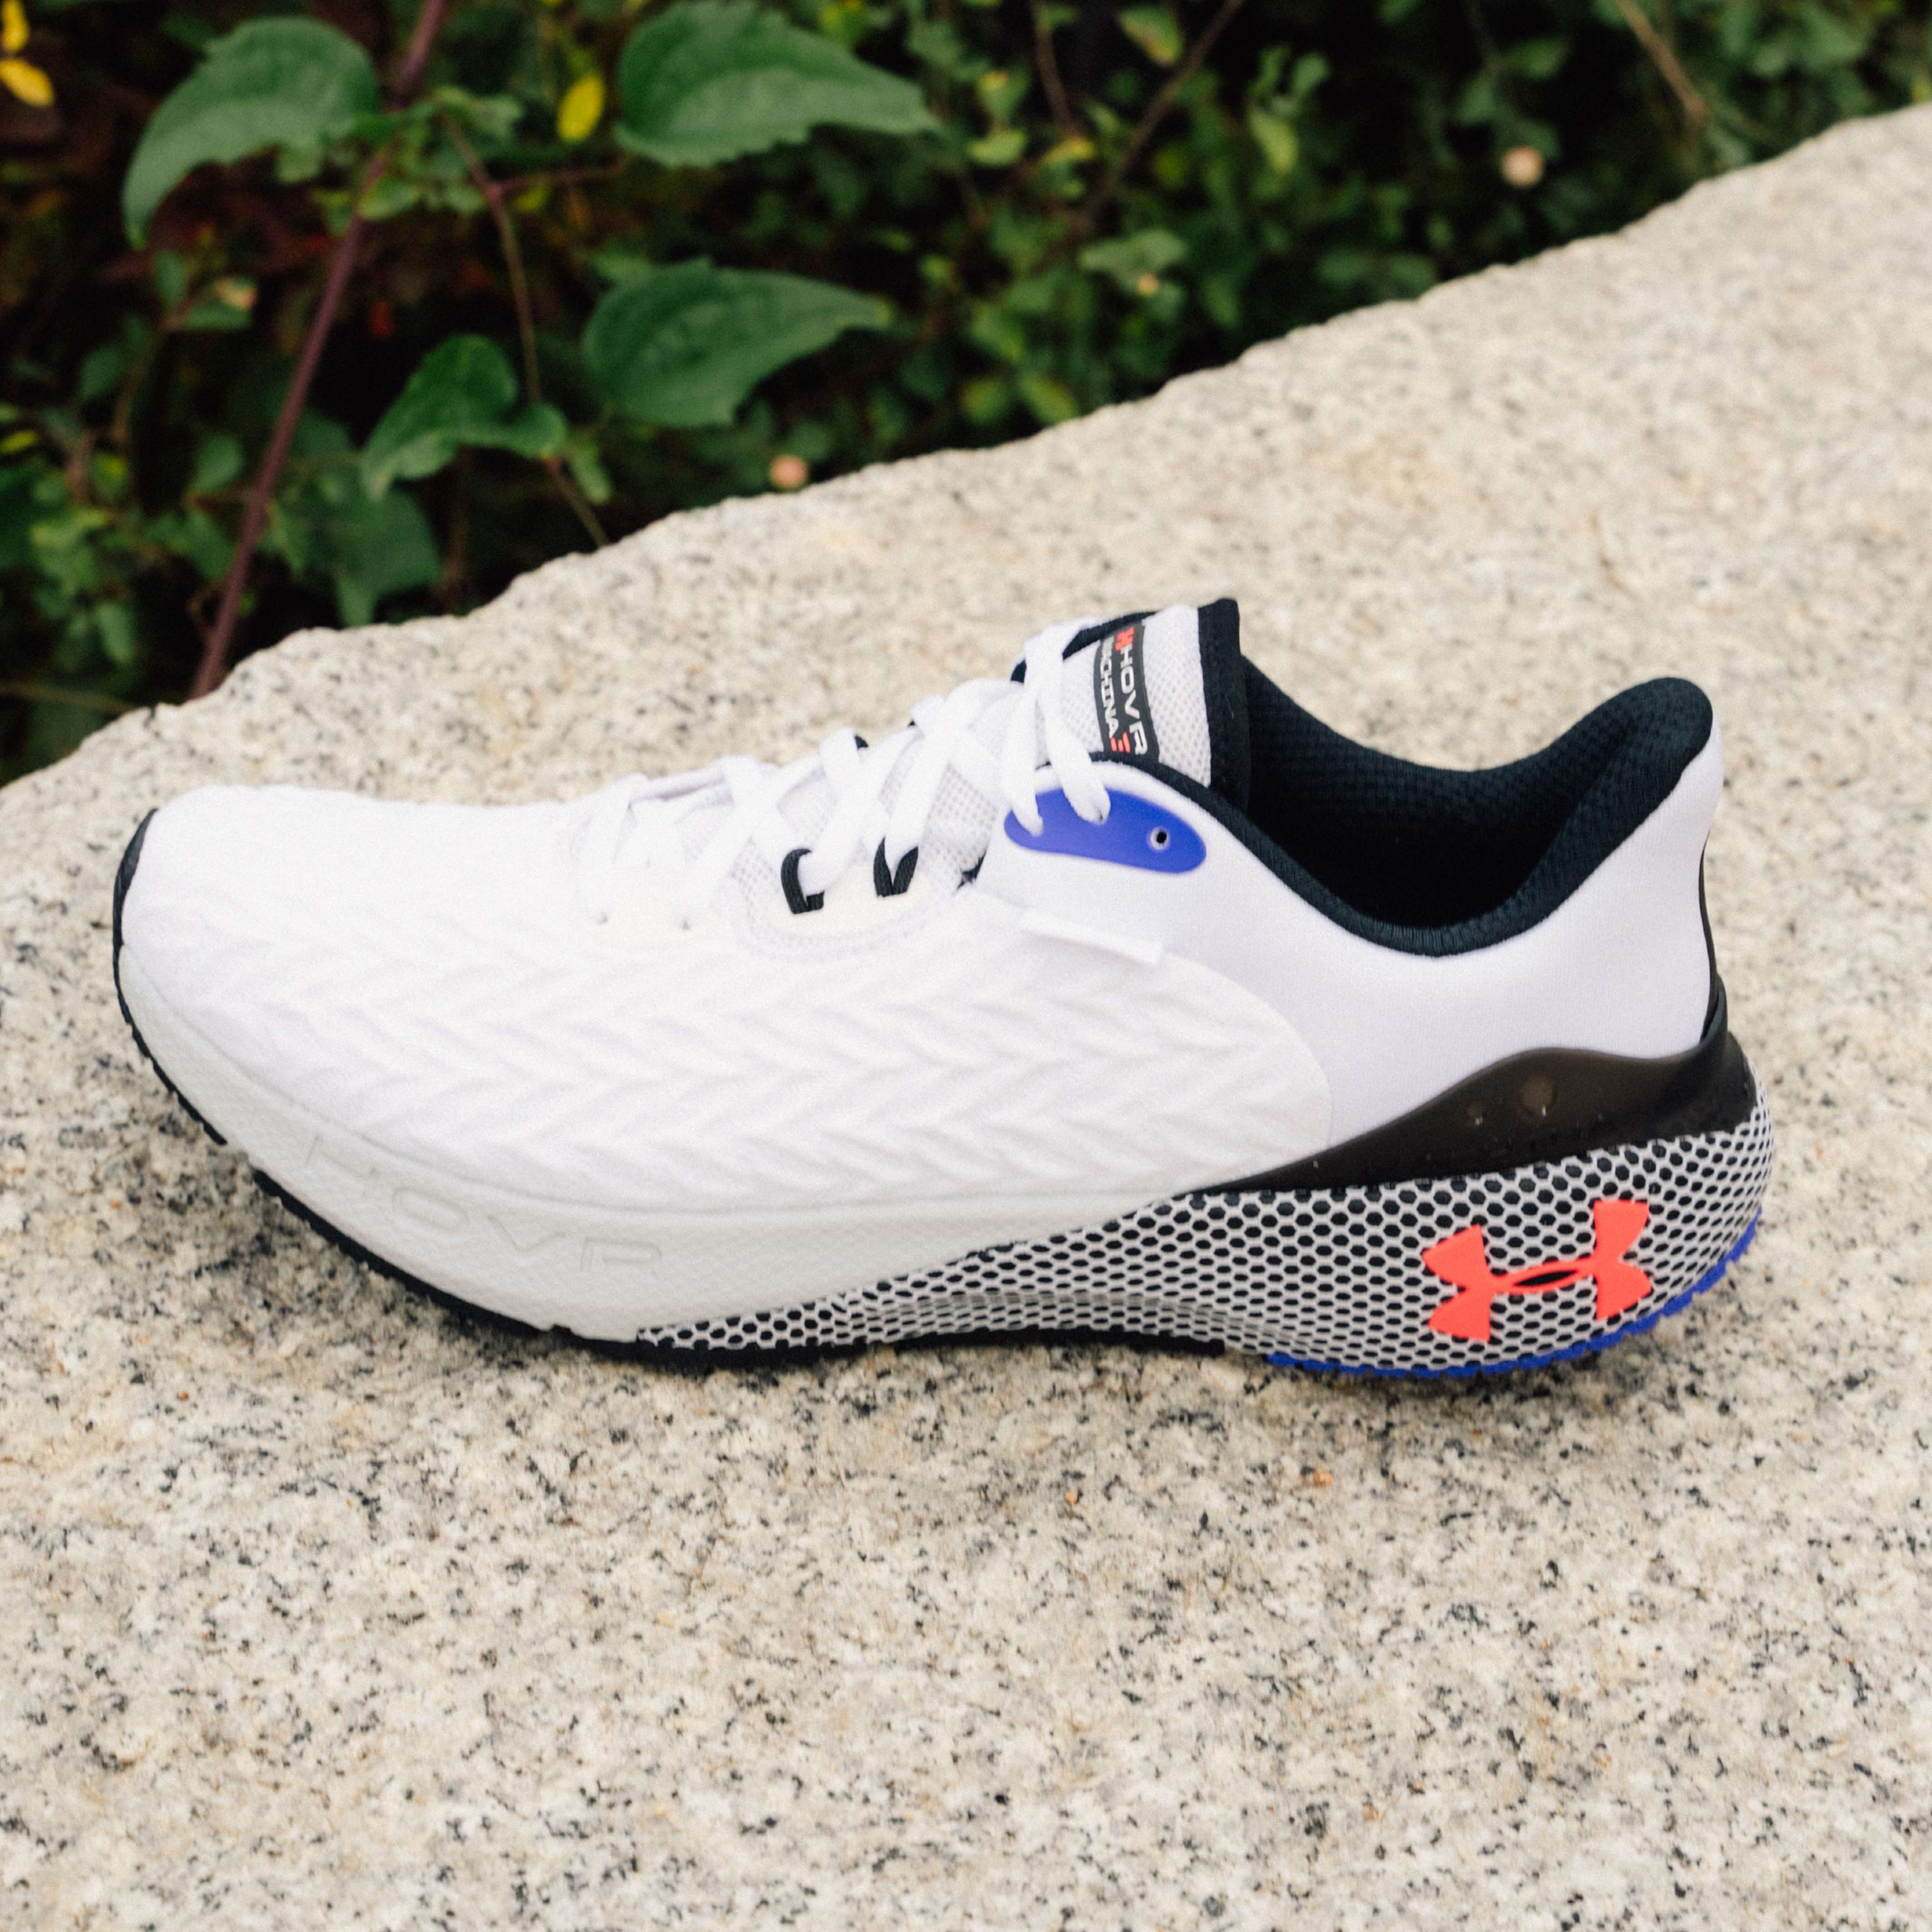 Test: Under Armour HOVR Machina 3 - The Pill Outdoor Journal